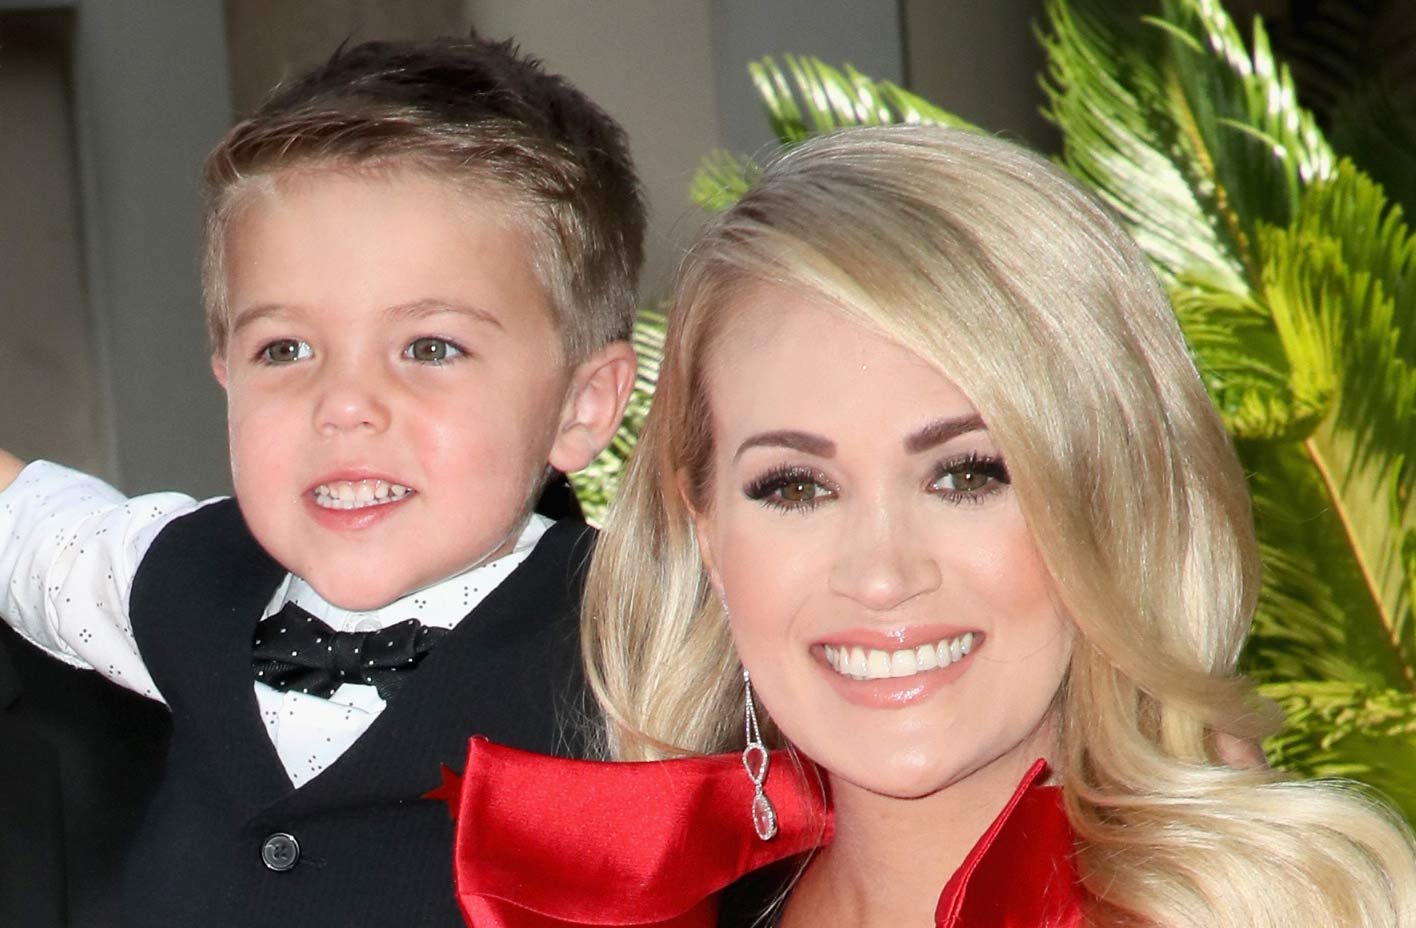 Carrie Underwood Sings with Her Son Isaiah on Christmas Album – Listen Now! | Carrie Underwood ...